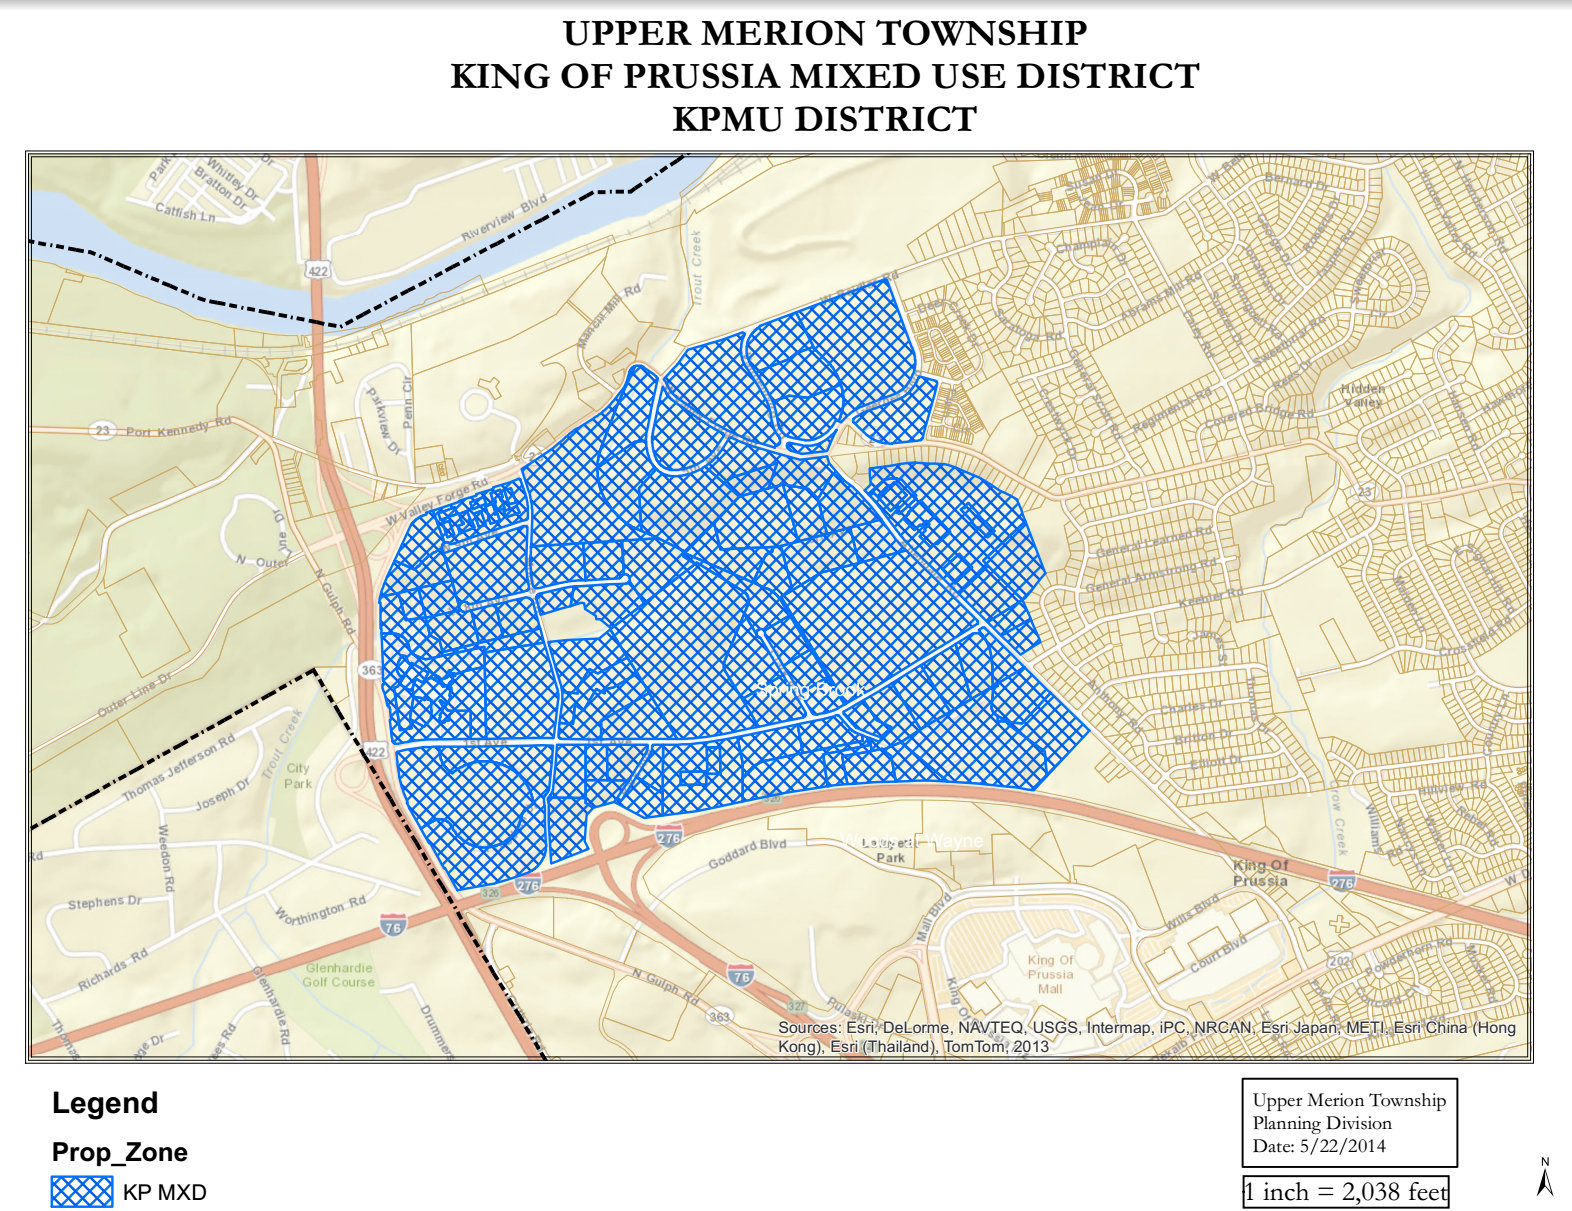 Upper Merion, King of Prussia mixed use district